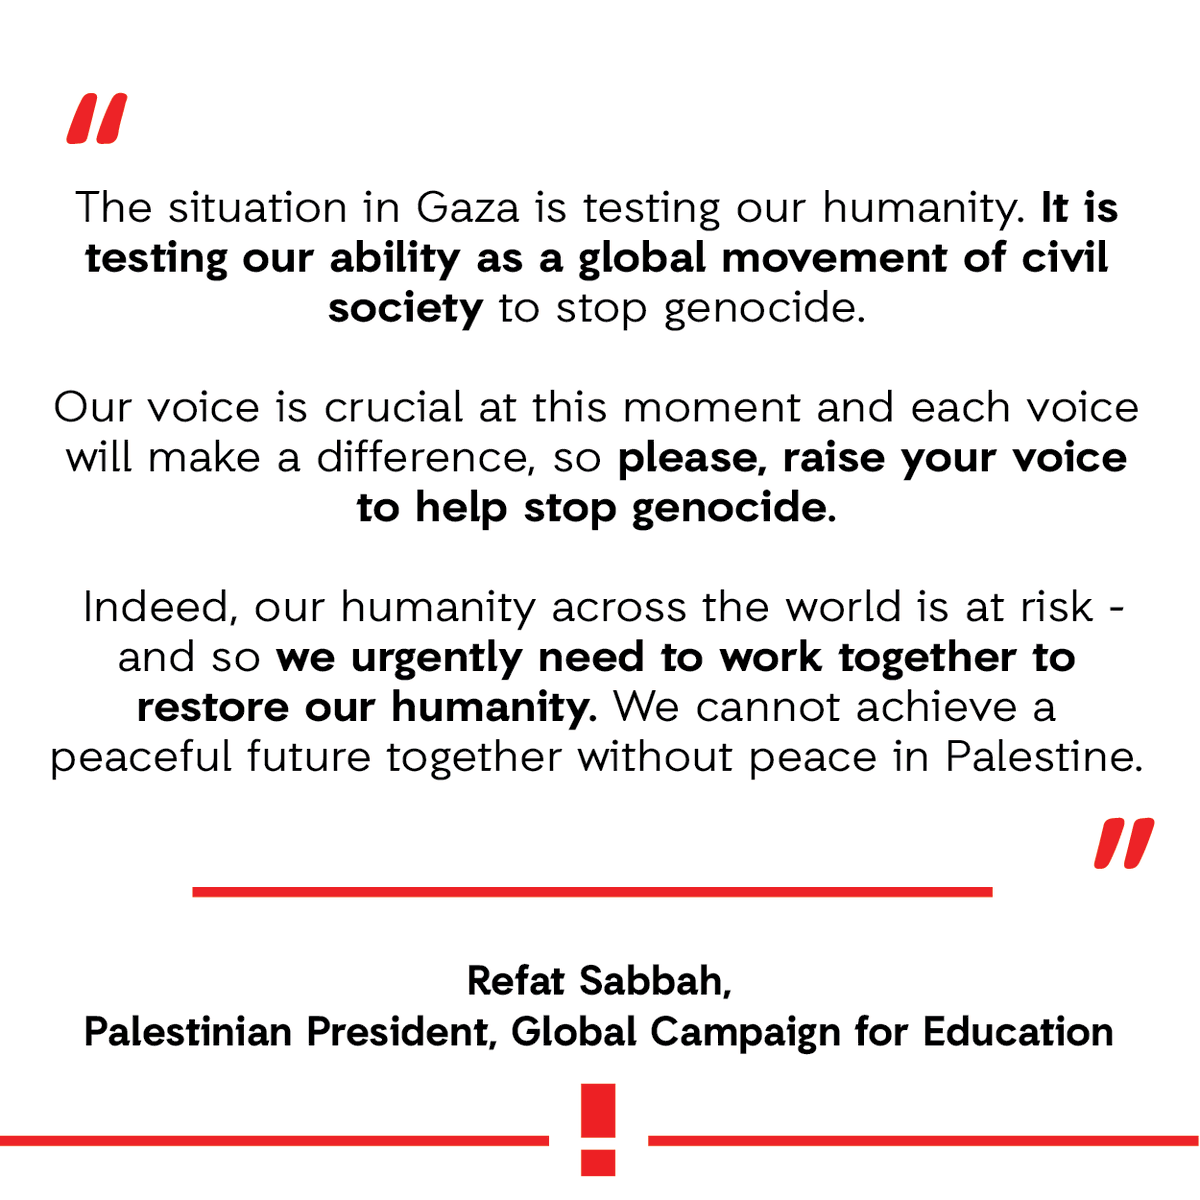 “The situation in Gaza is testing our humanity.' - Dr @RefatSabbah, president of the @globaleducation. We join activists at the @UN CSO Conference tocall for action to end the violence & ensure the protection of civilians in #Gaza. Read more: bit.ly/3yfgIW0